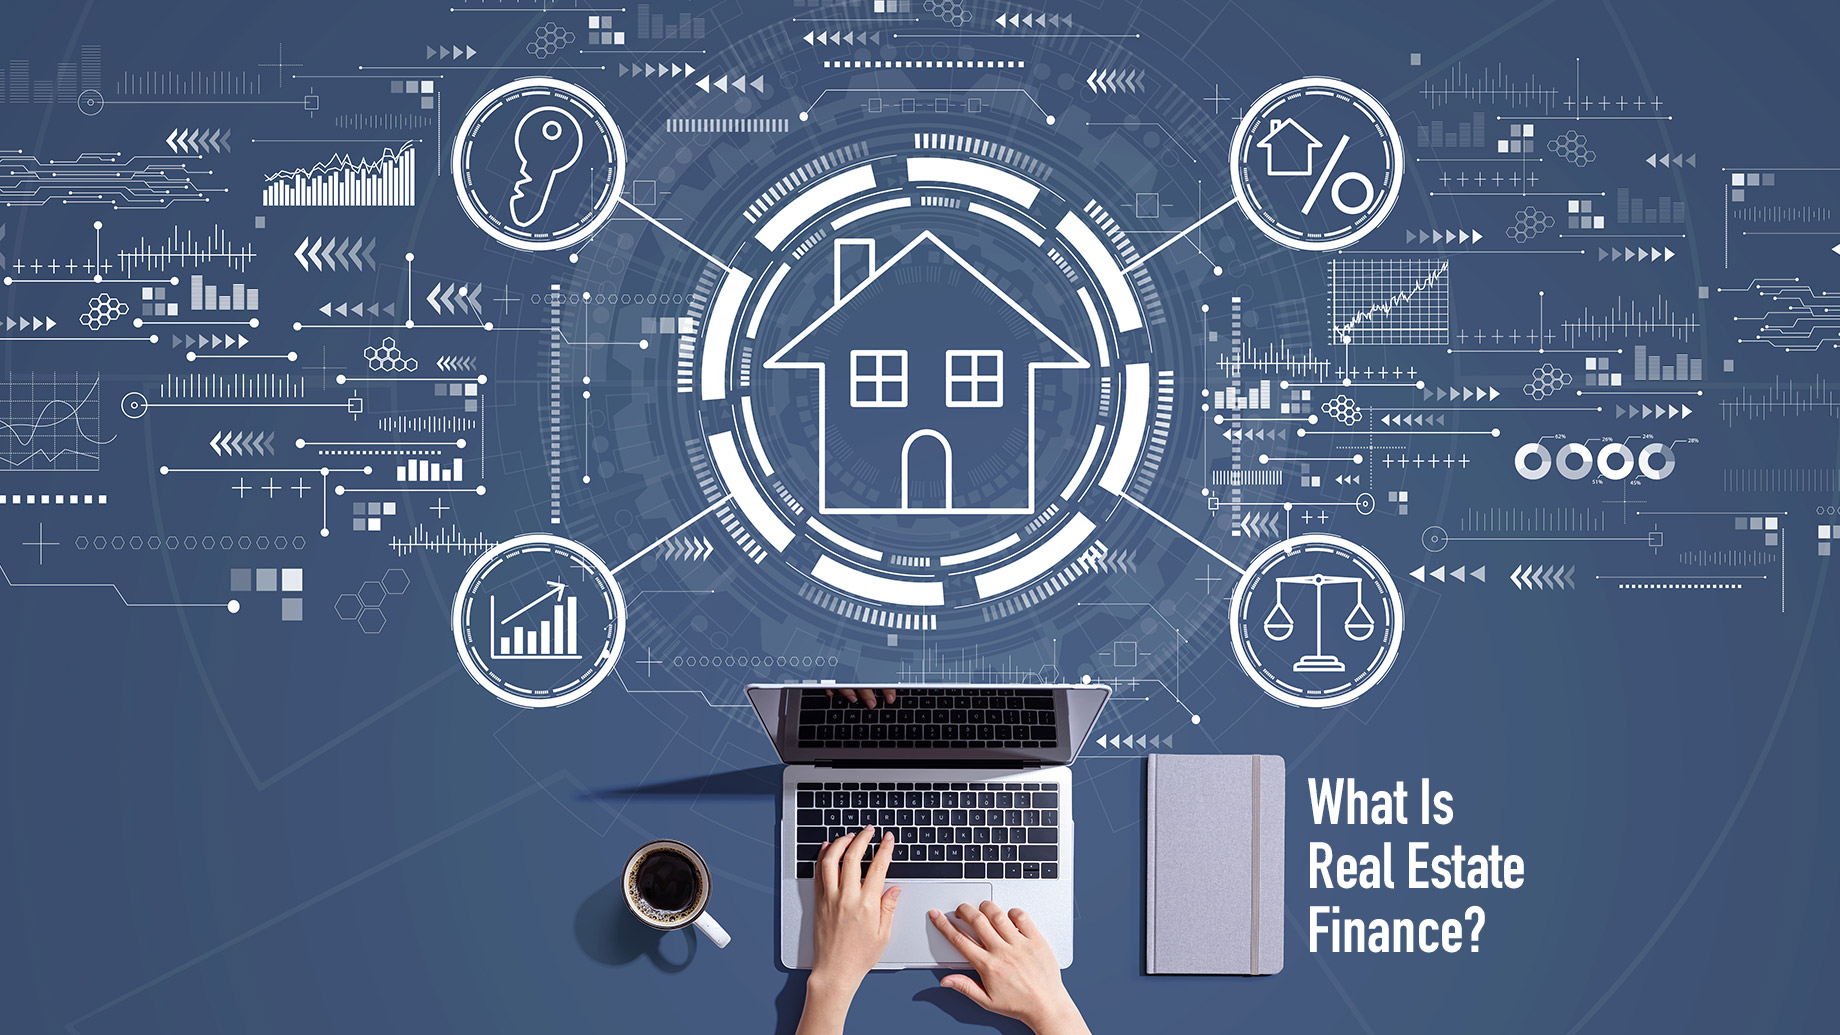 What Is Real Estate Finance?